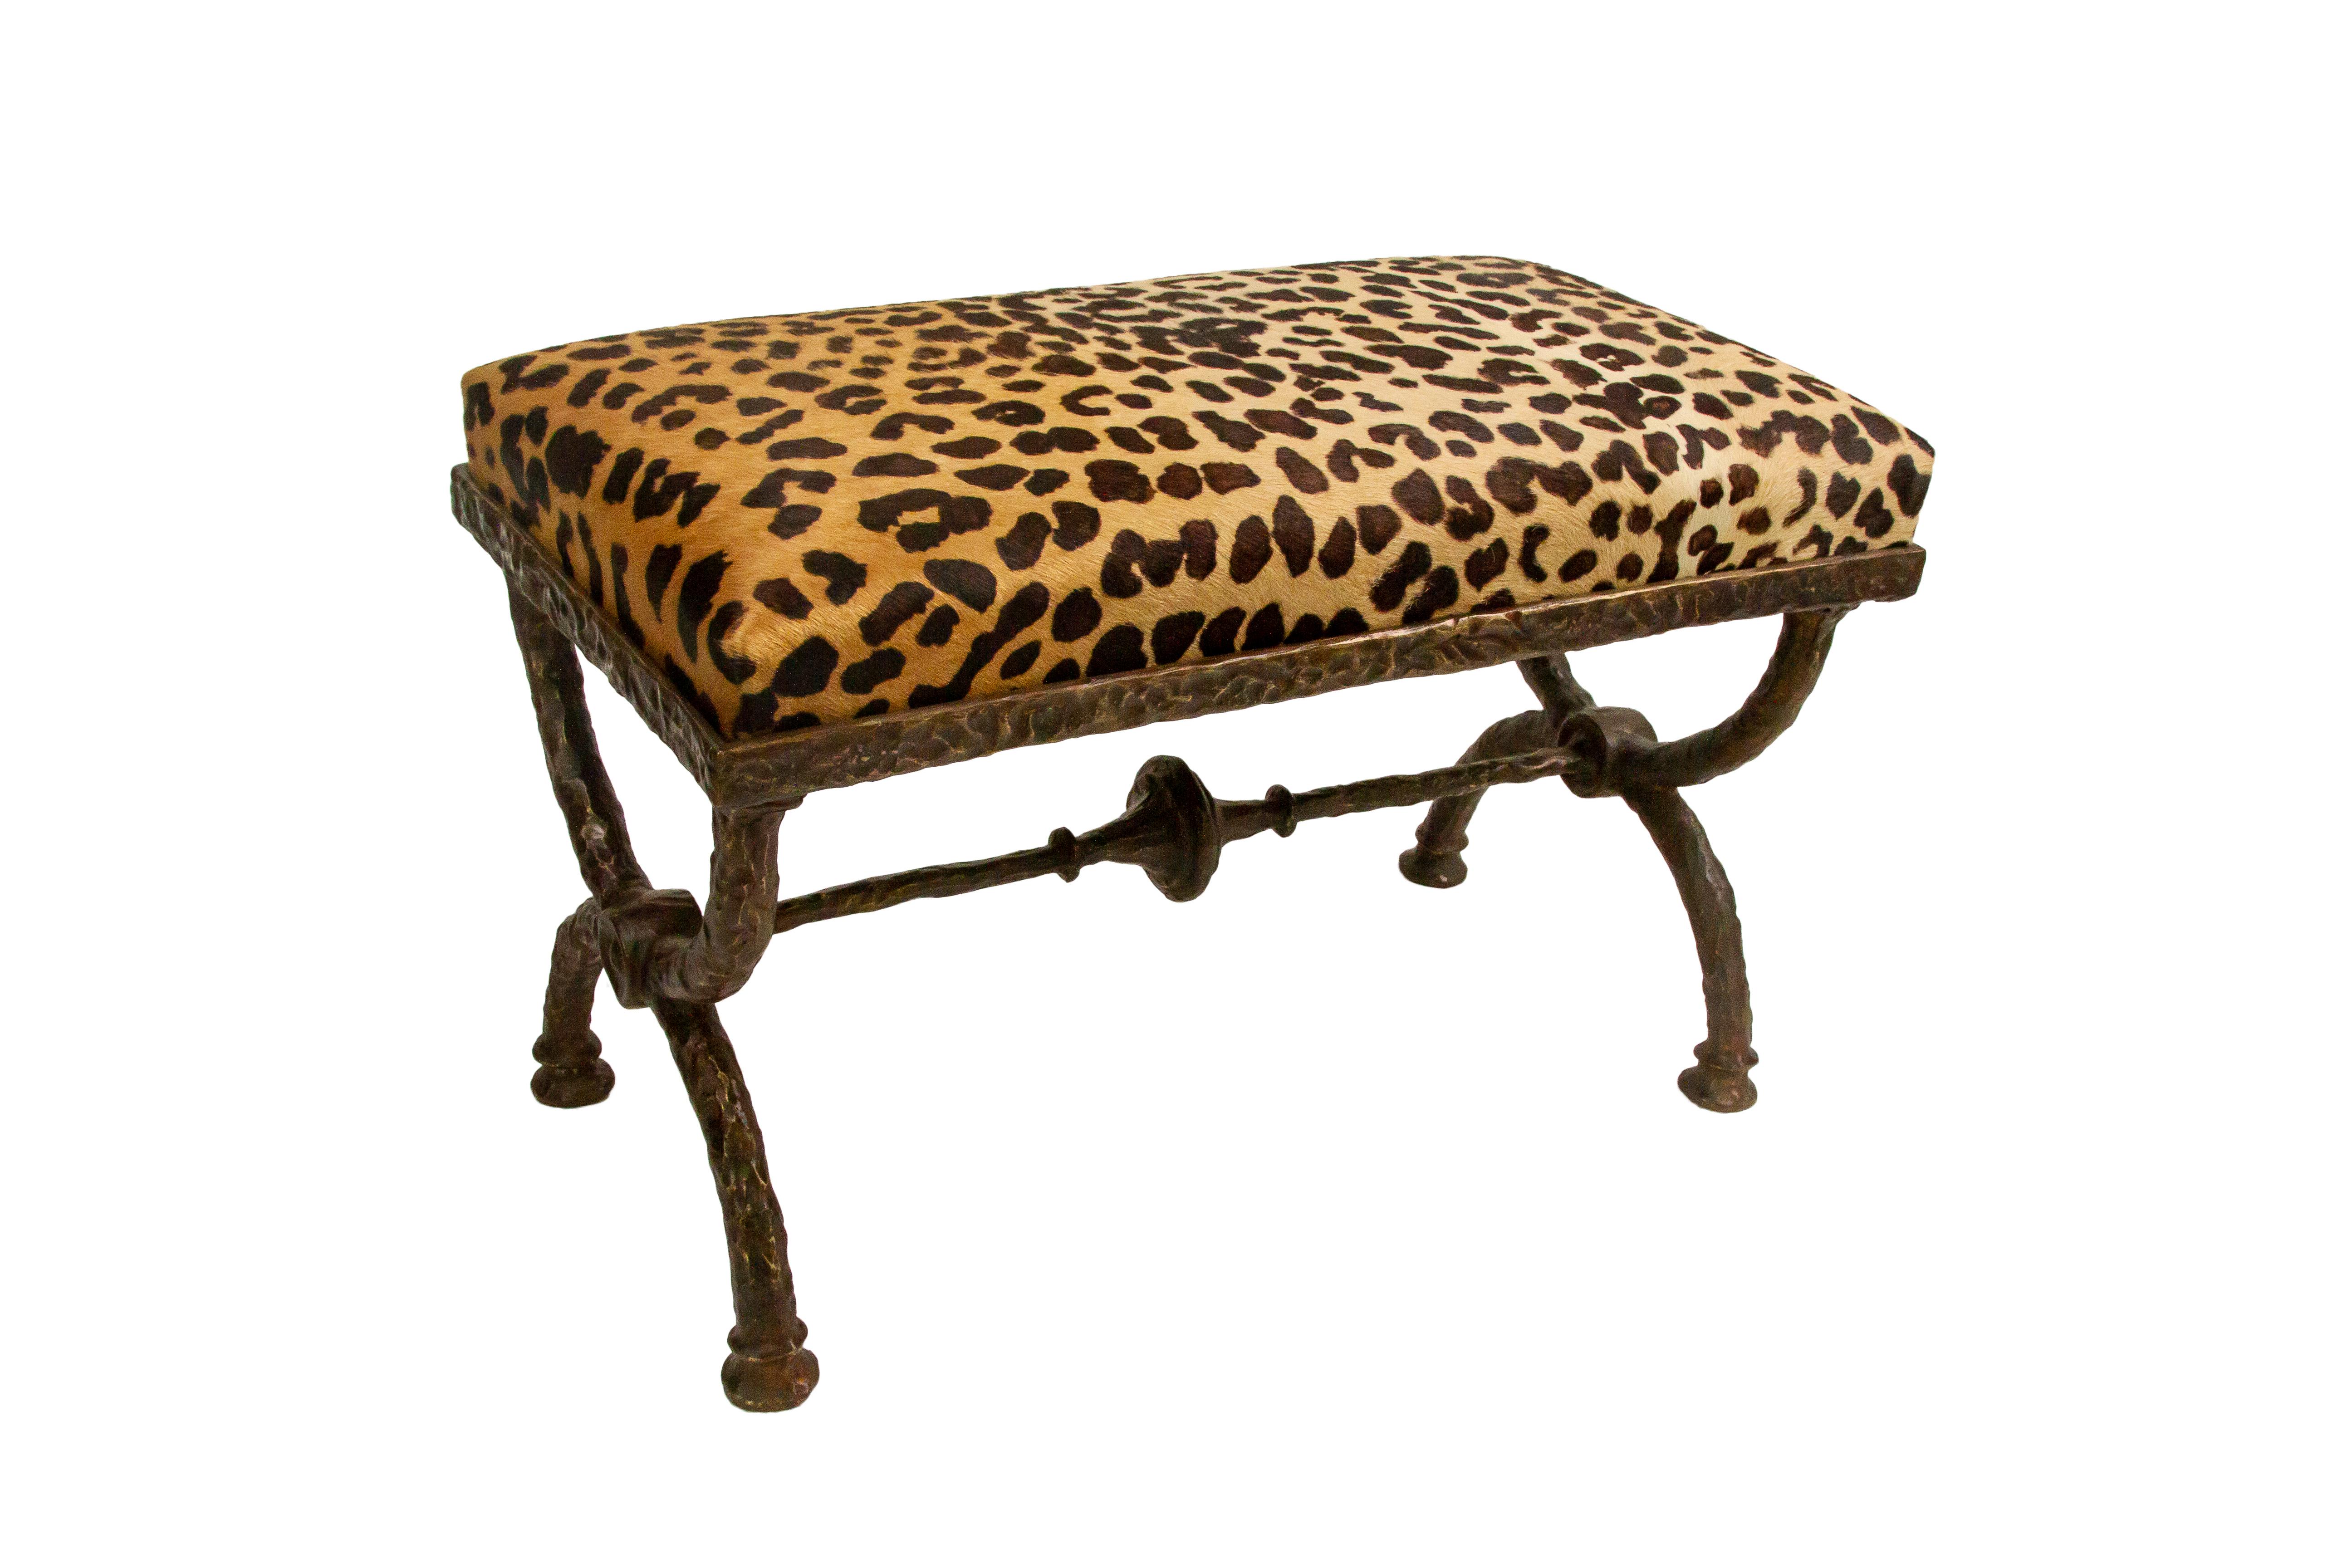 Bronze Stool with Upholstered Brown or Black Leather Seat In New Condition For Sale In Ballard, CA